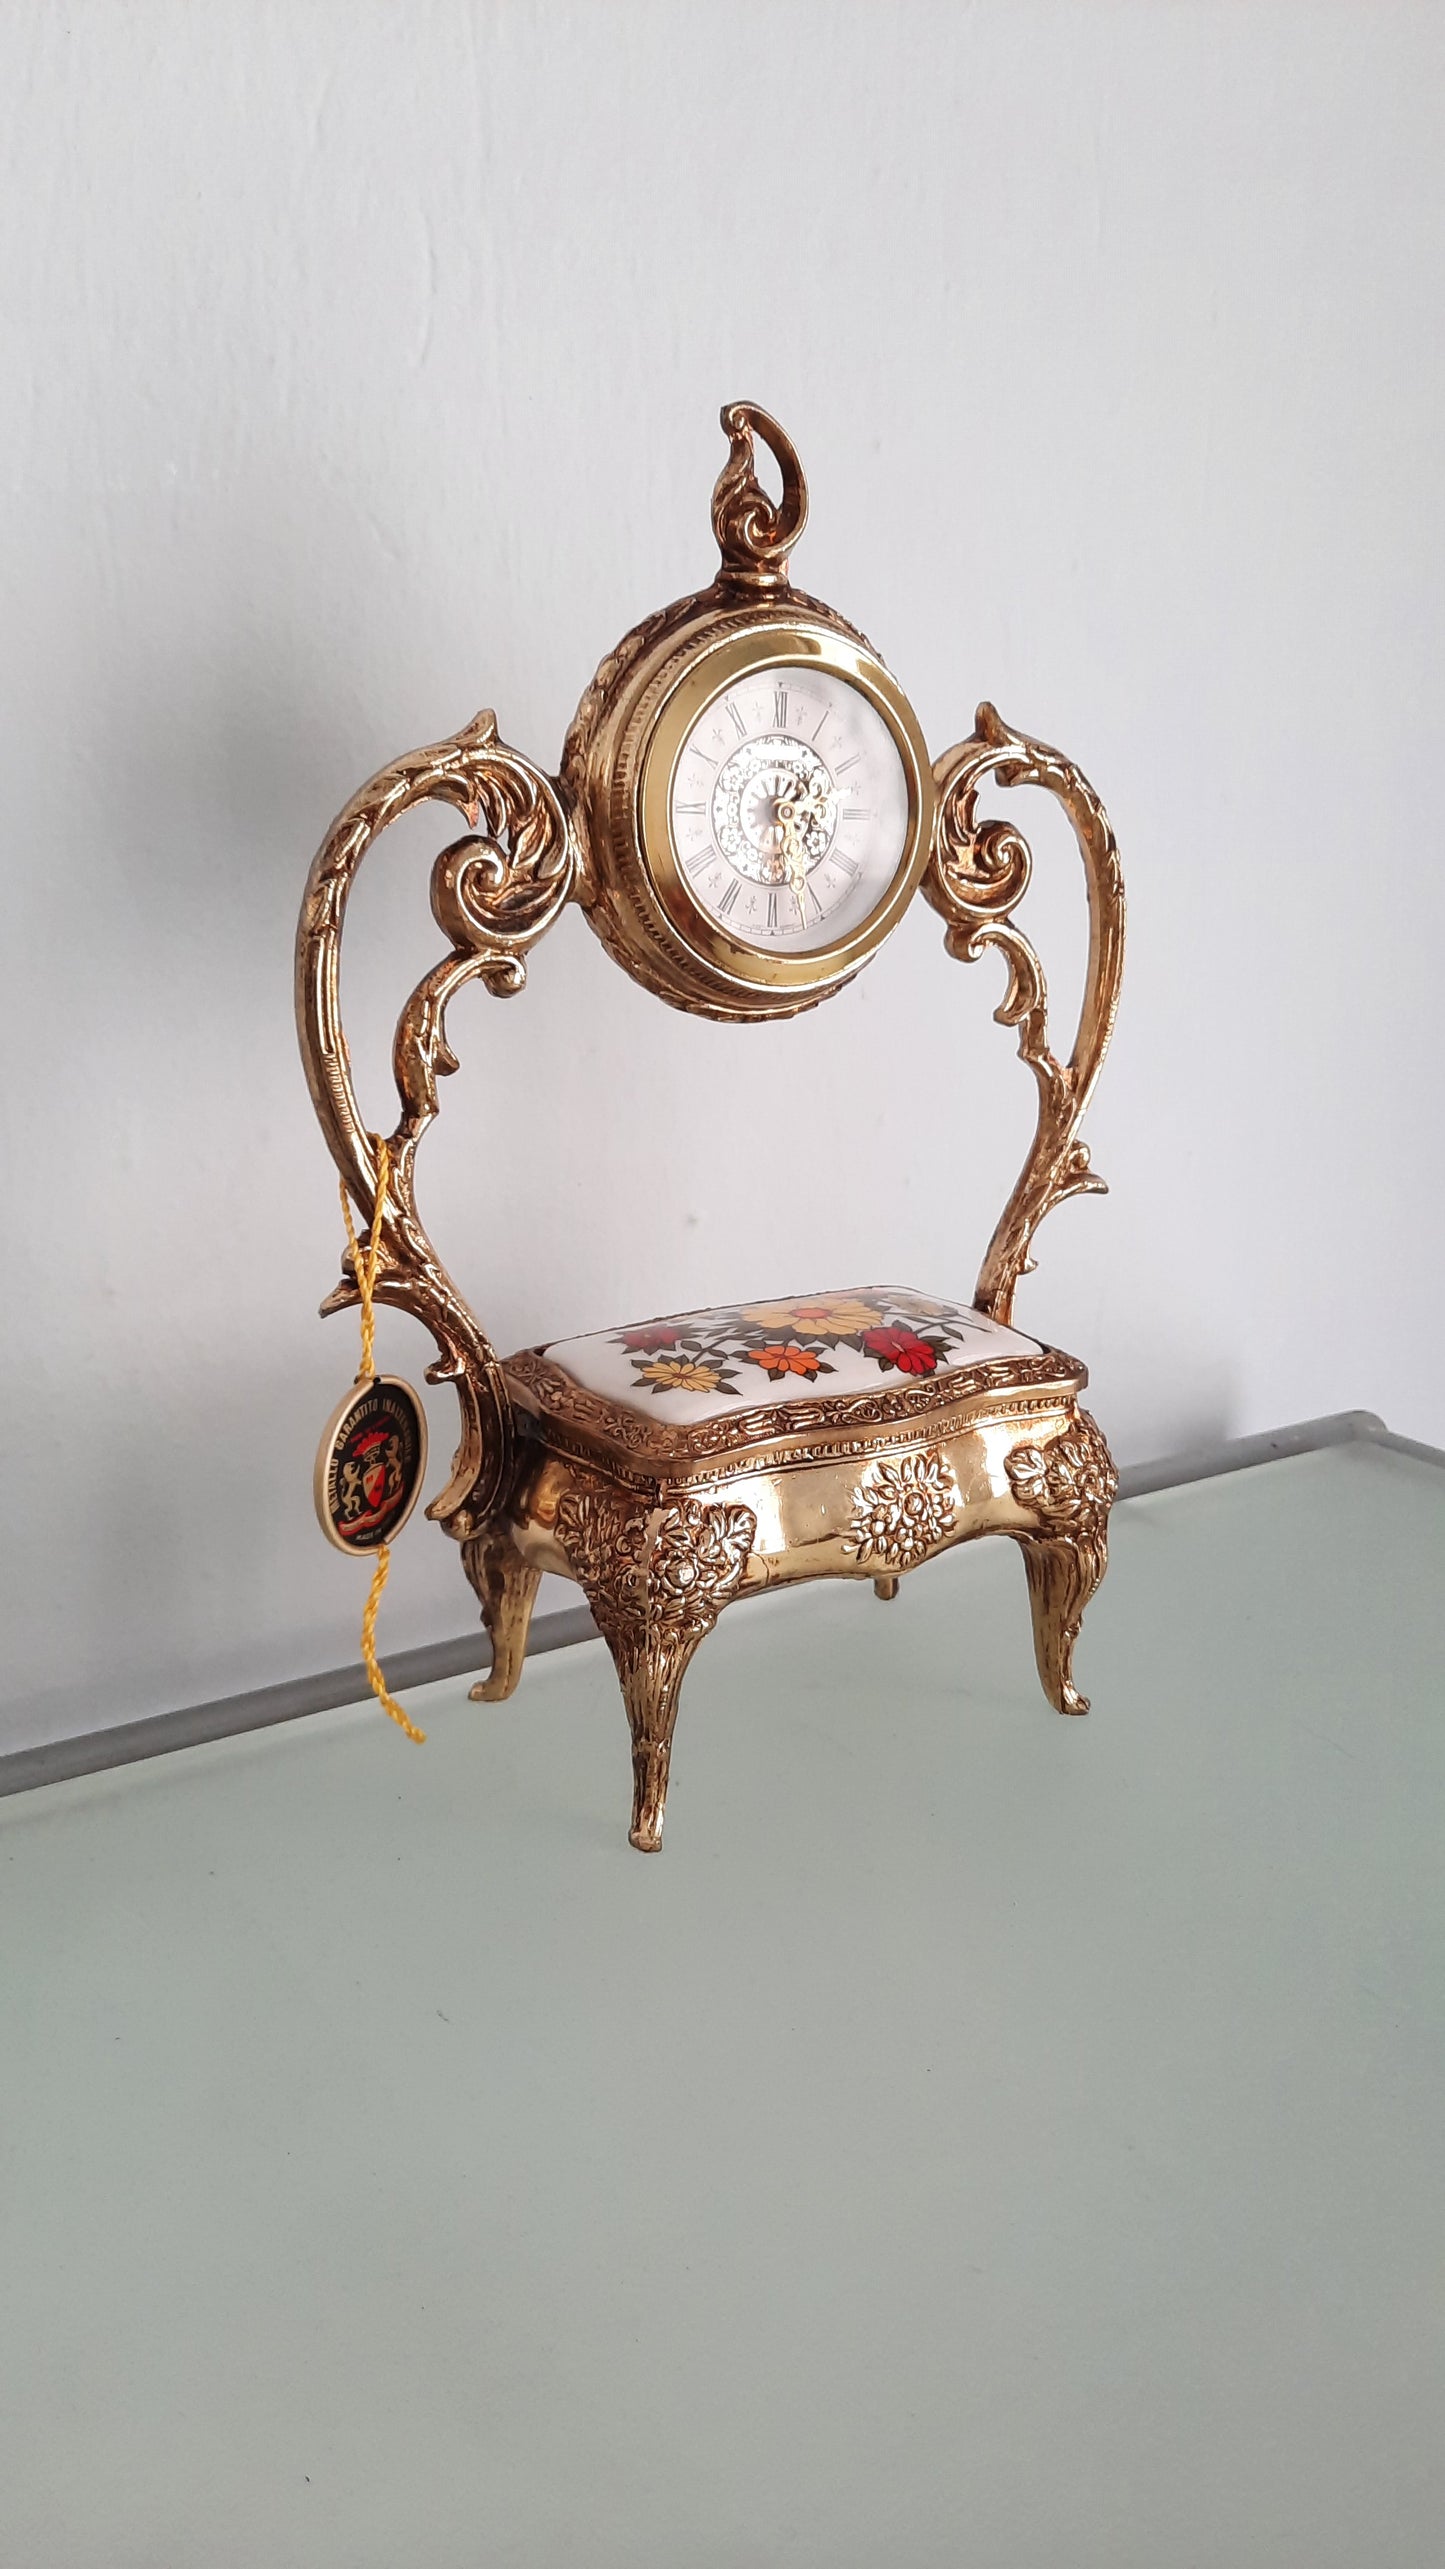 West Germany Antique Style Mantel Clock